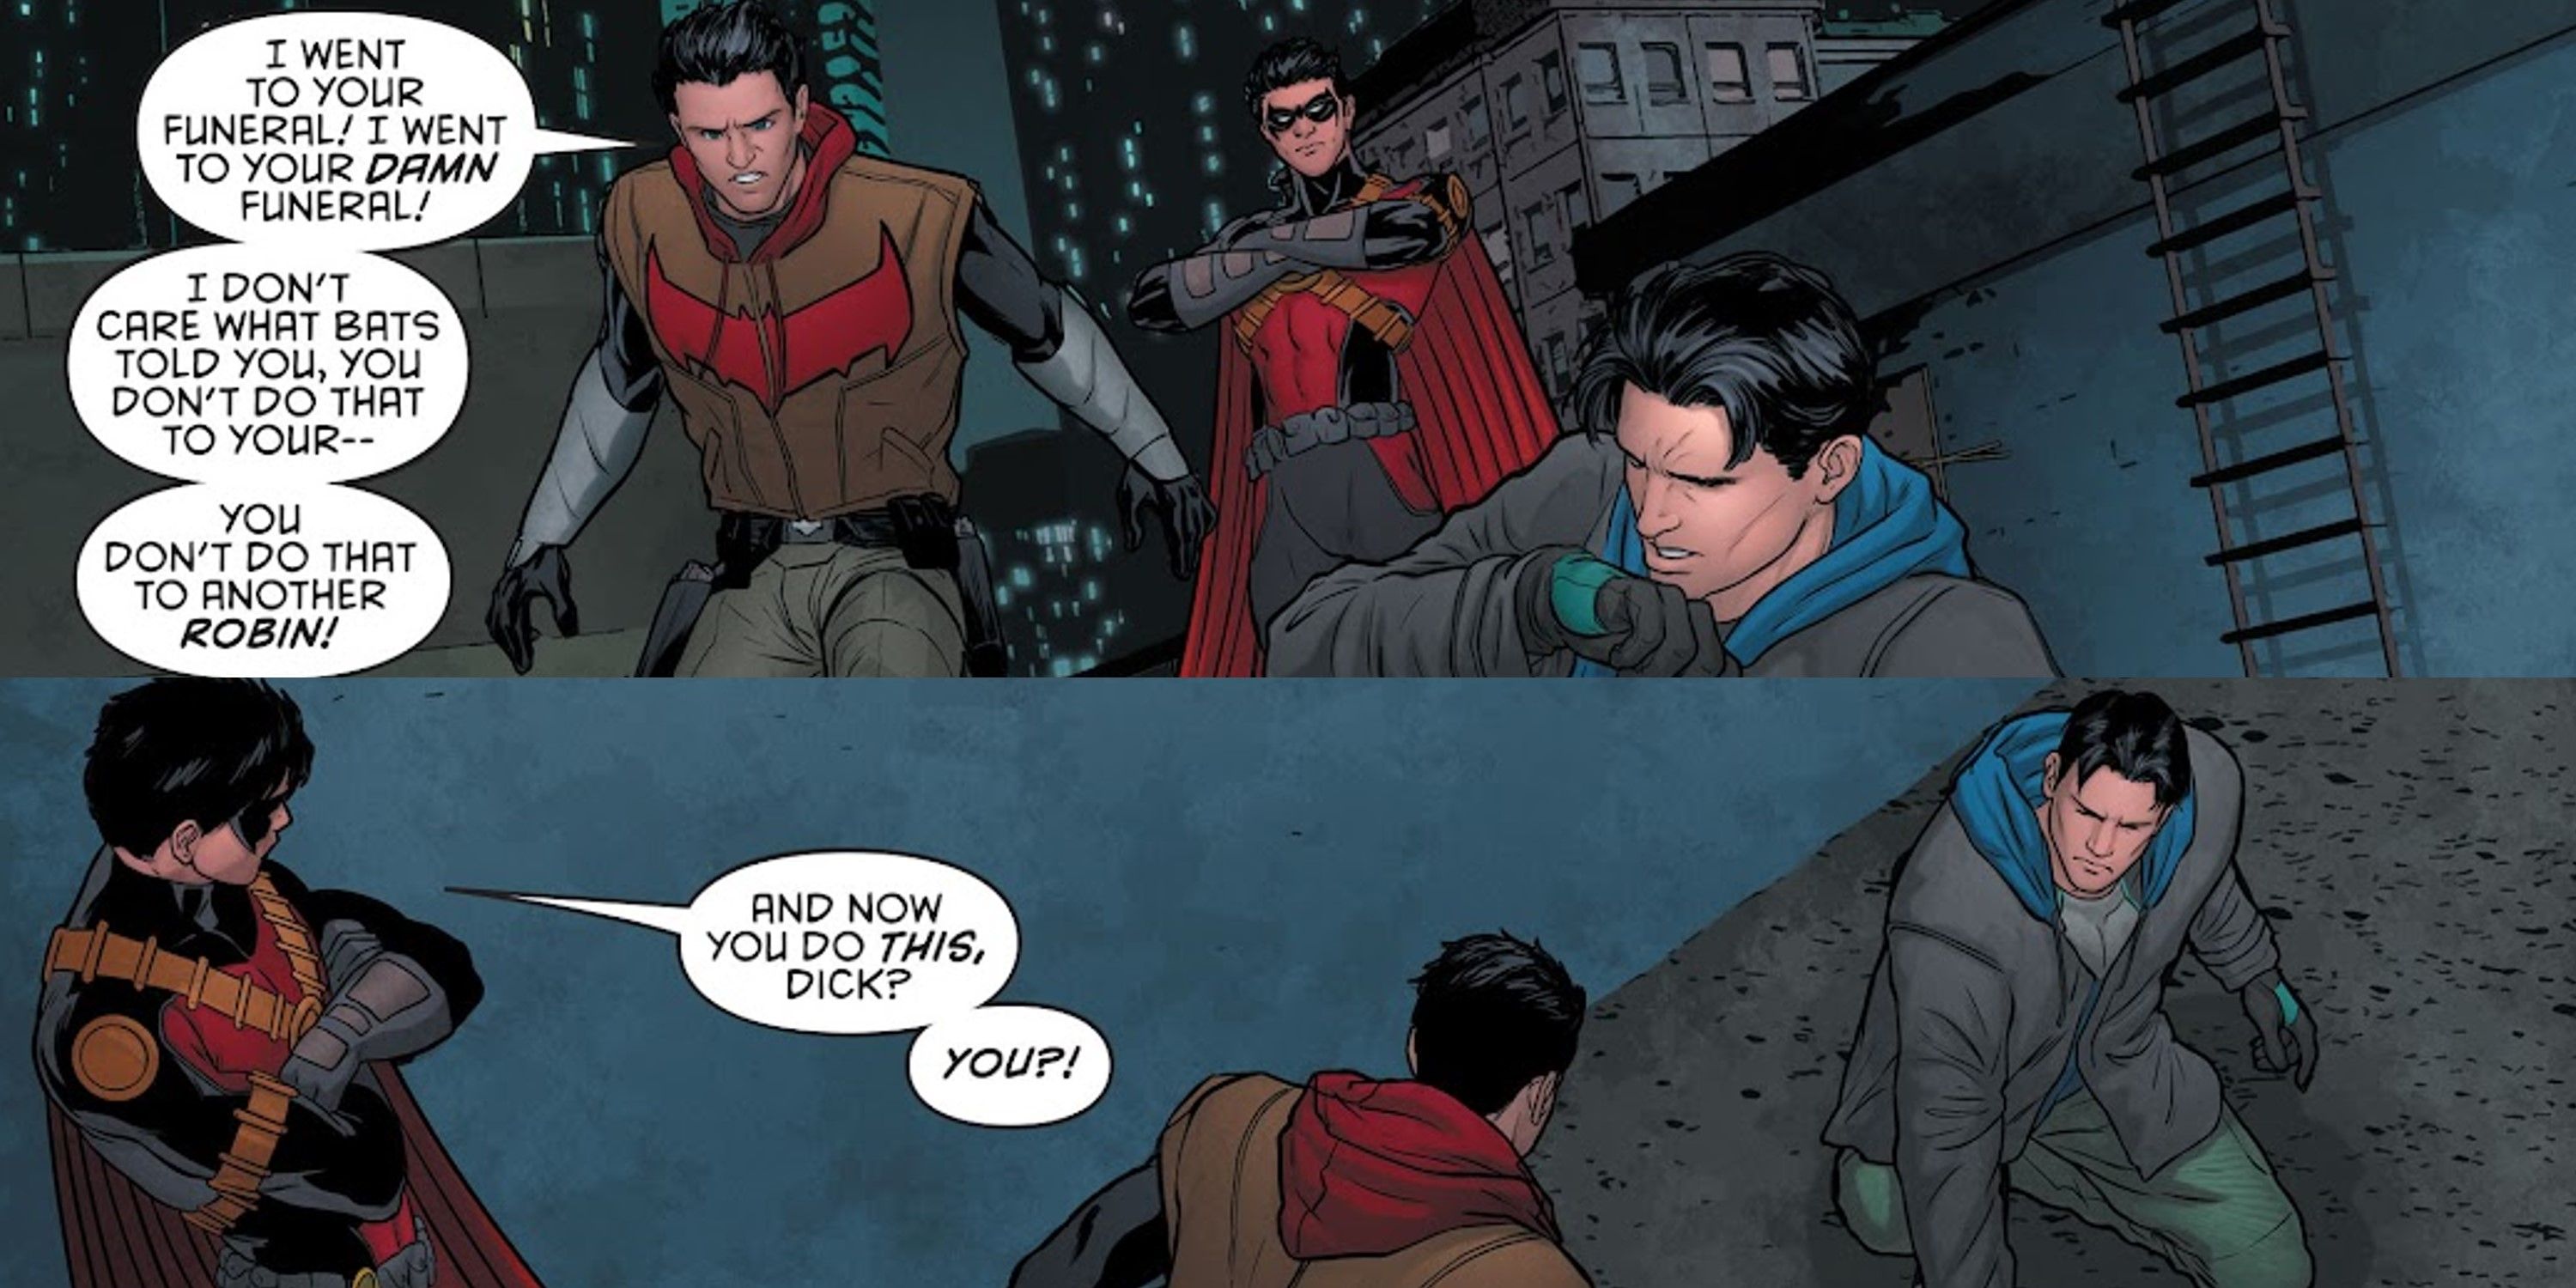 Jason Todd and Tim Drake confront Nightwing about the way he faked his own death in DC Comics